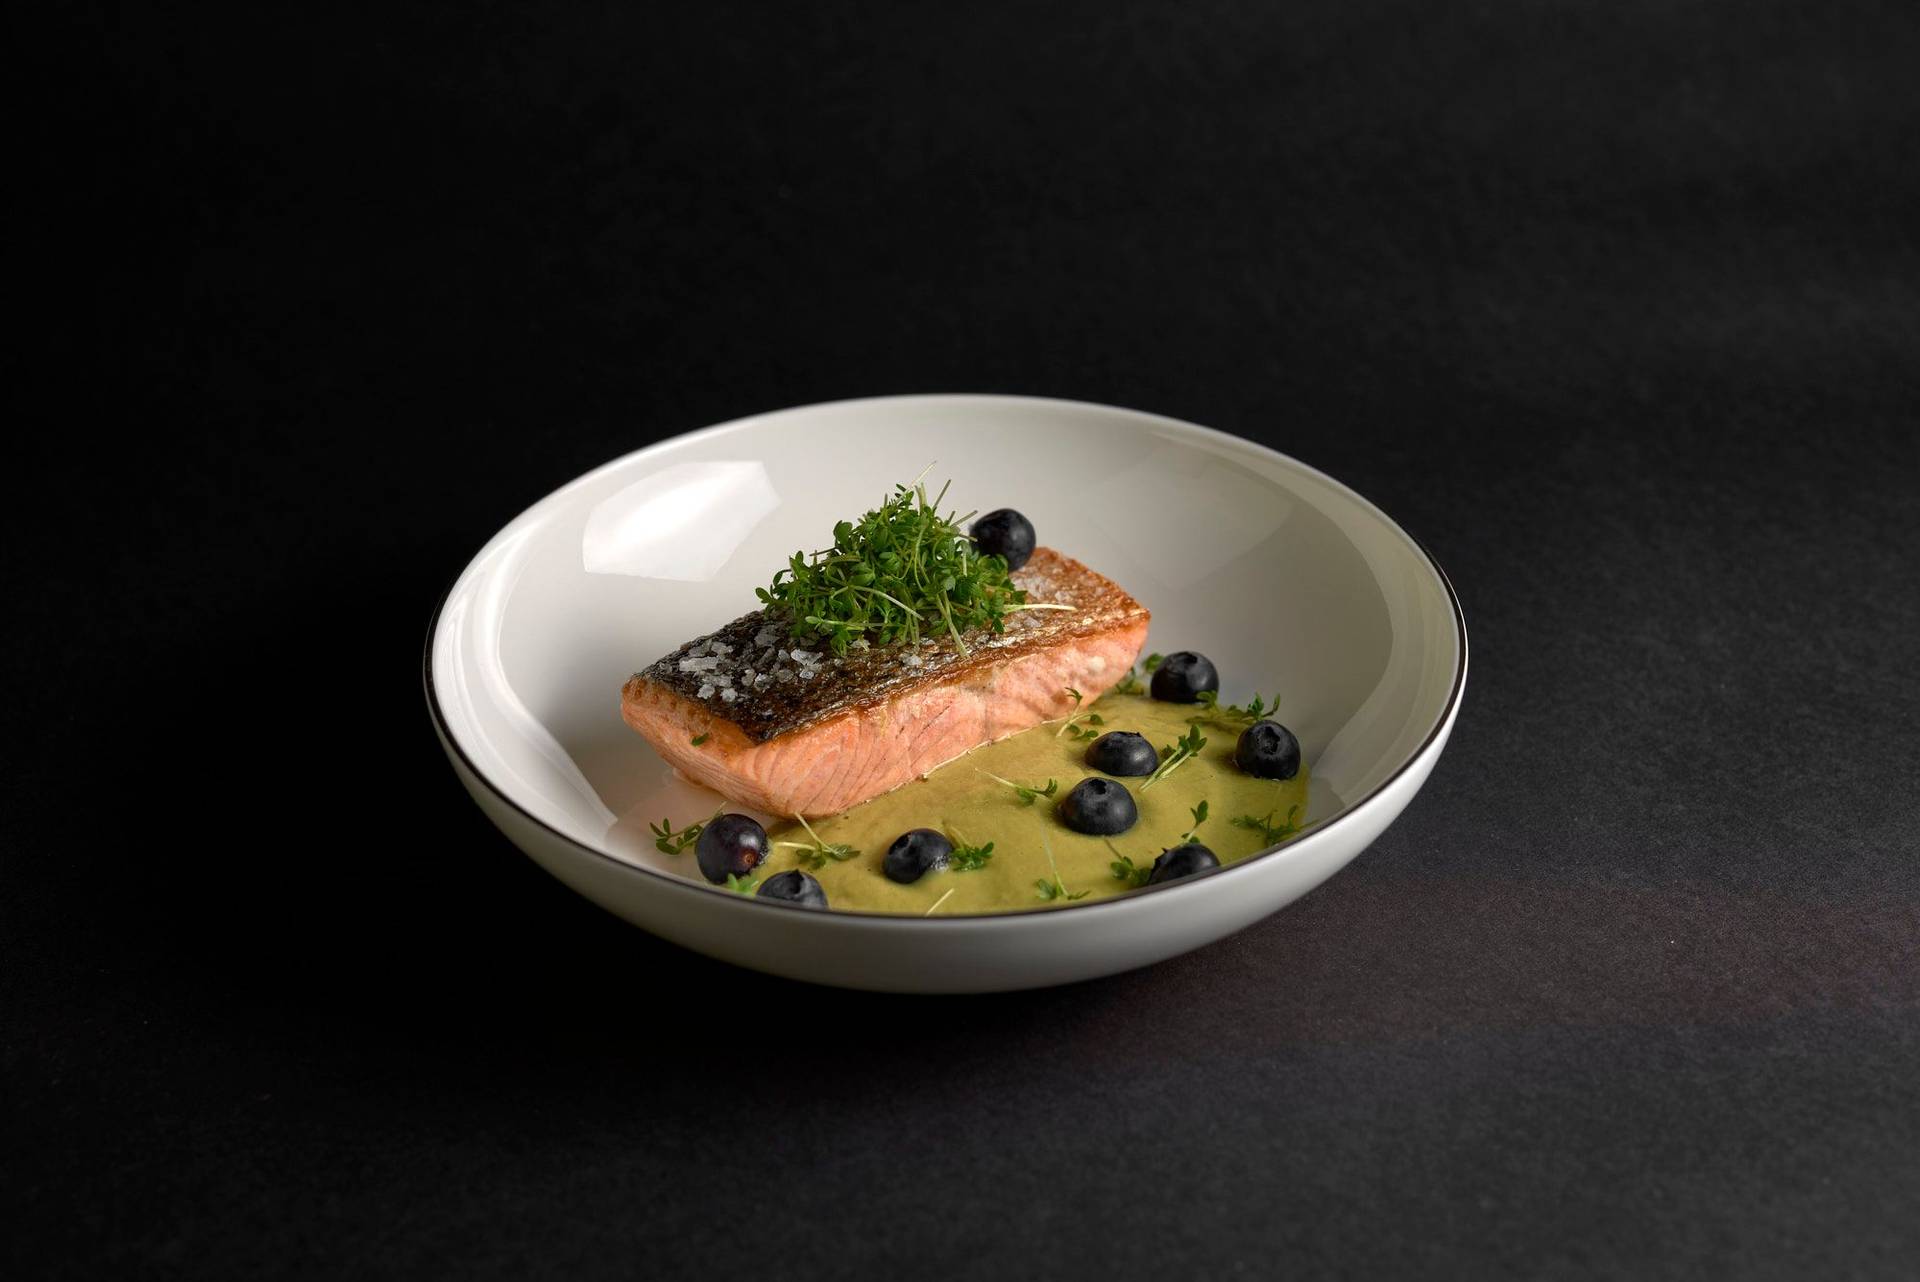 pan fried salmon with asparagus matcha sauce and blueberries on a white plate with black background